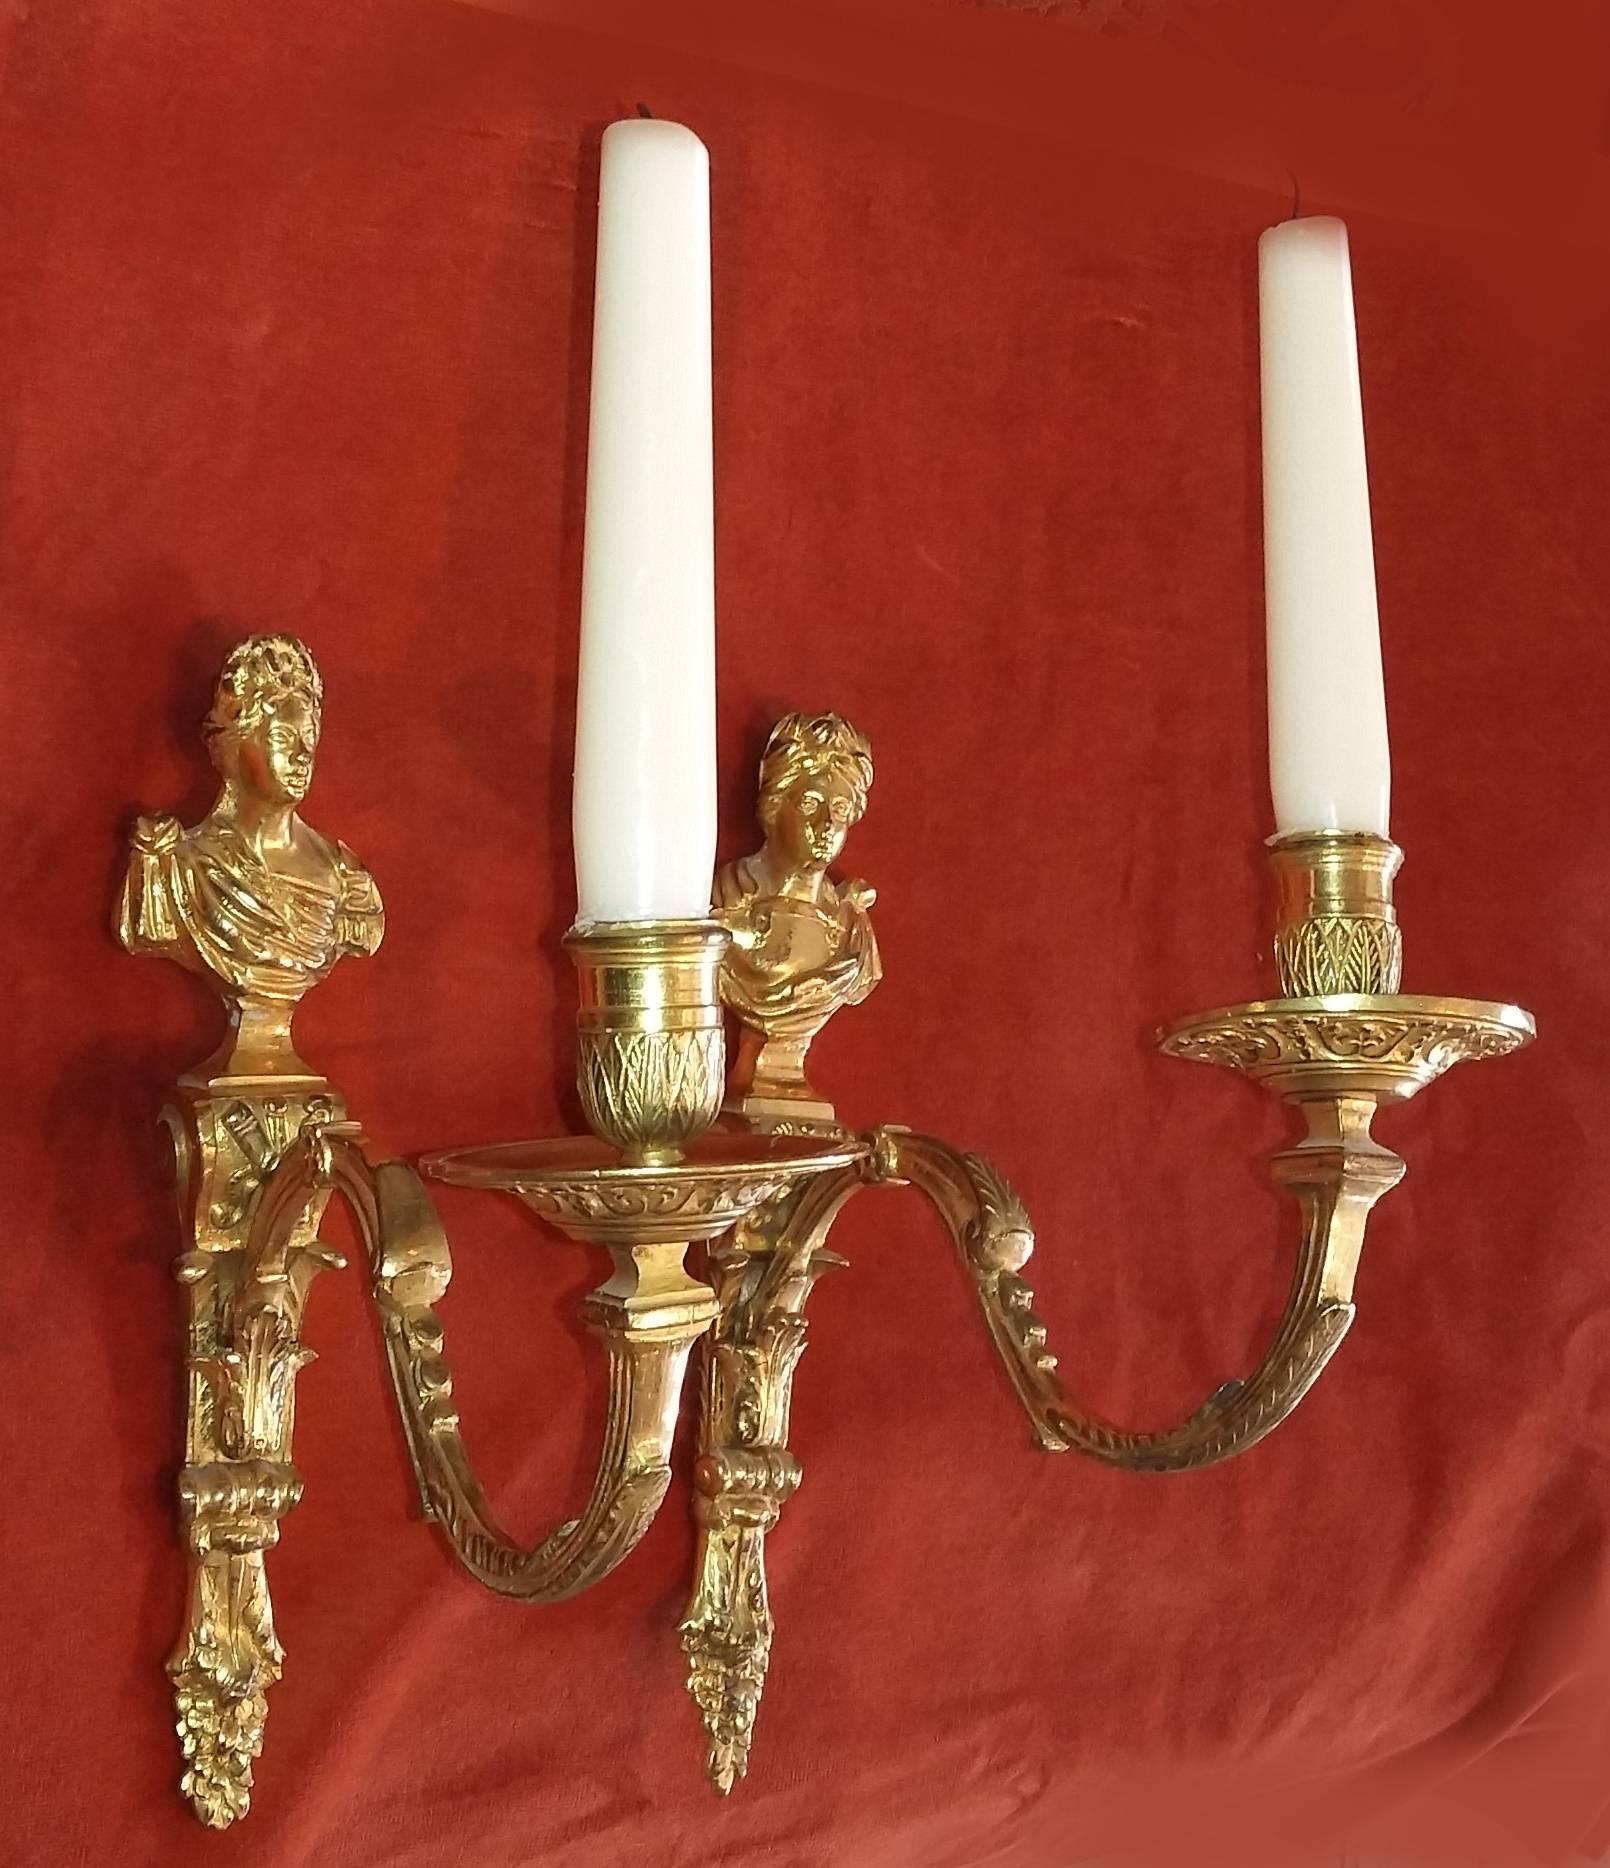 A pair of fine French Regence period gilt bronze wall lights showing Apollo and Diana, circa 1720.